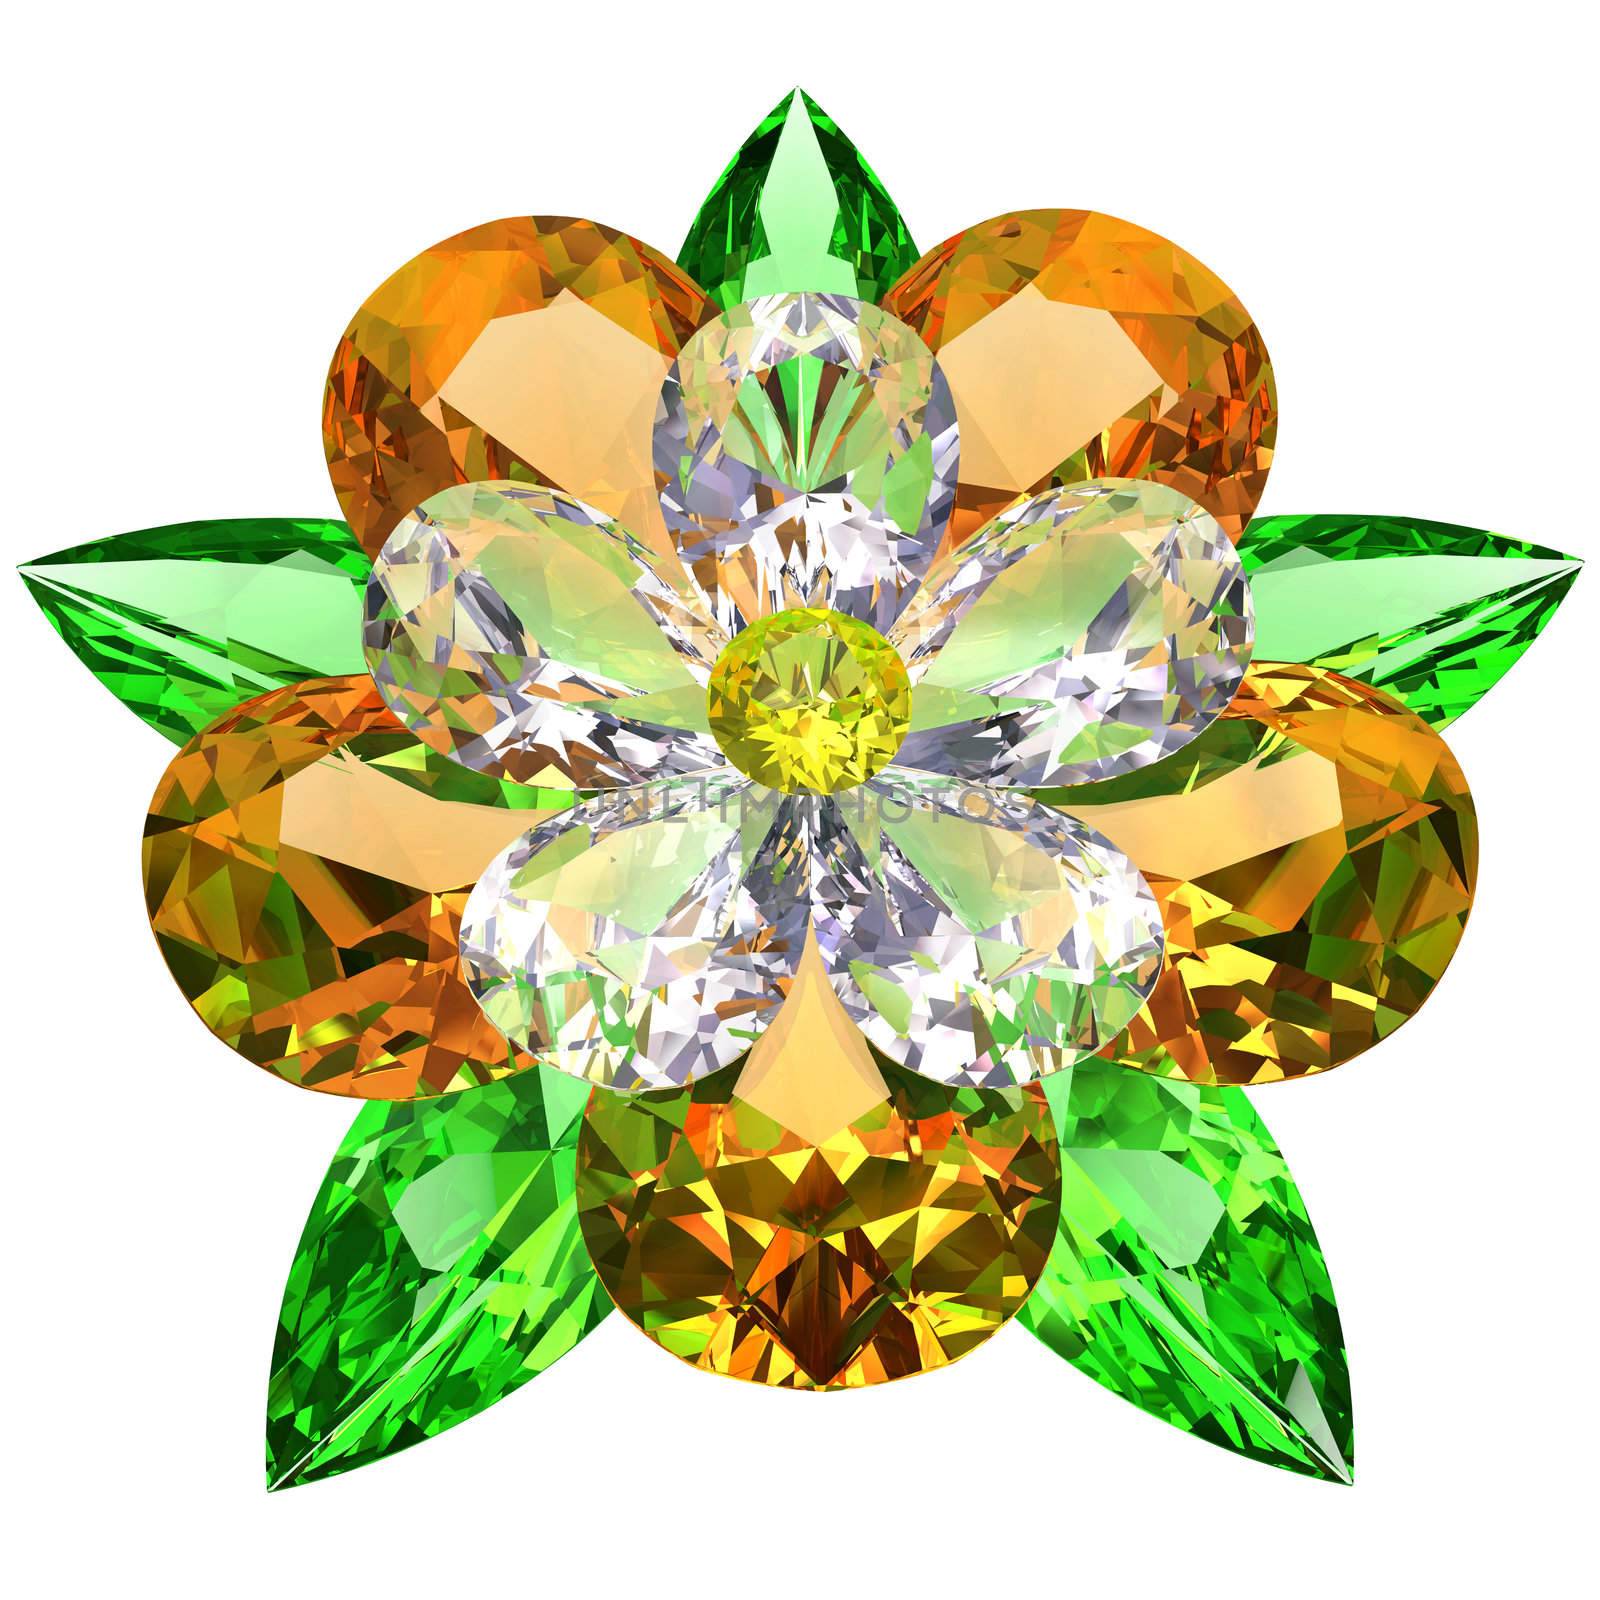 Flower composed of colored gemstones on white background. High resolution 3D image